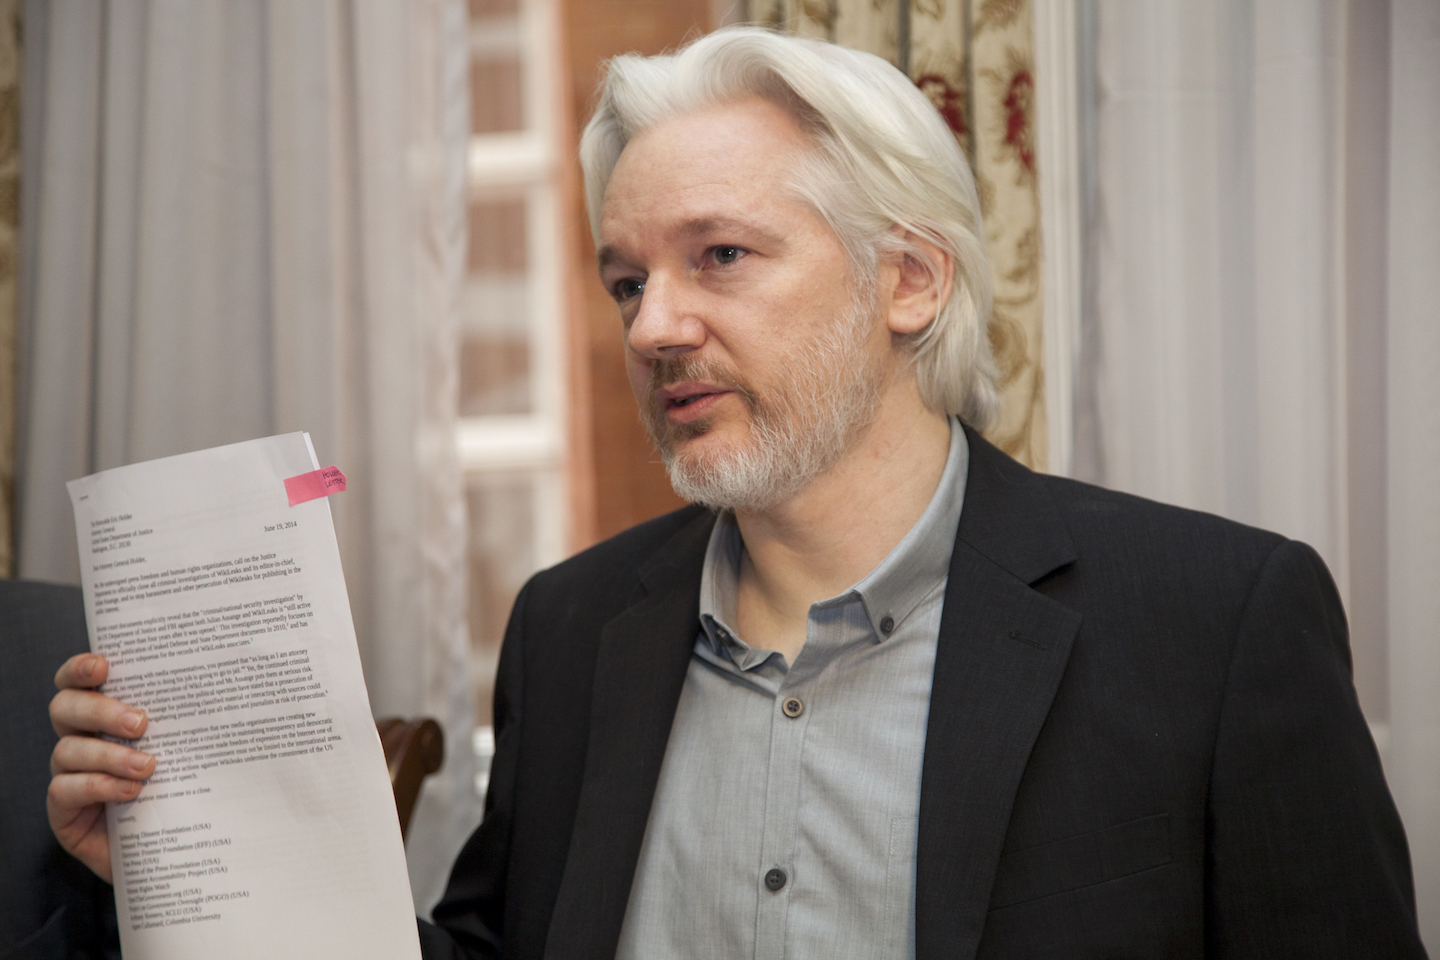 Image: Feds plan on arresting WikiLeaks’ Julian Assange; Shouldn’t they also arrest these reporters from NY Times, WaPo, The Guardian and CNN?